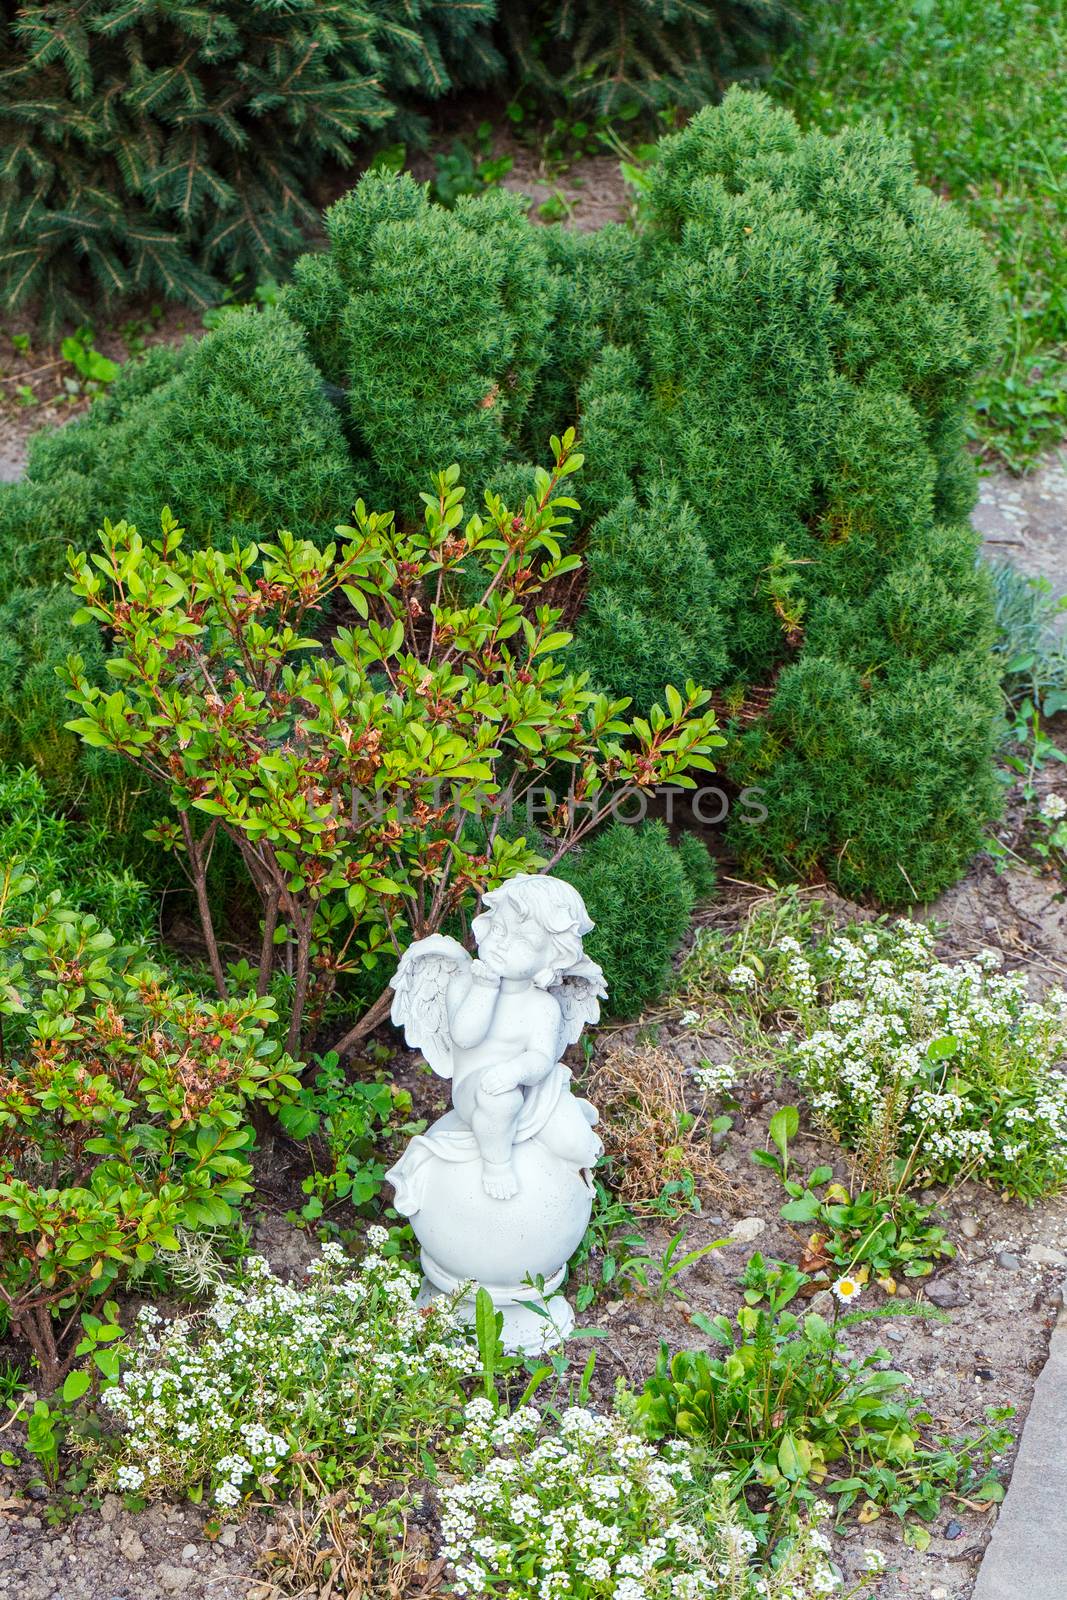 Sculpture of a small angel with a chin resting in the park near green bushes and flowers.